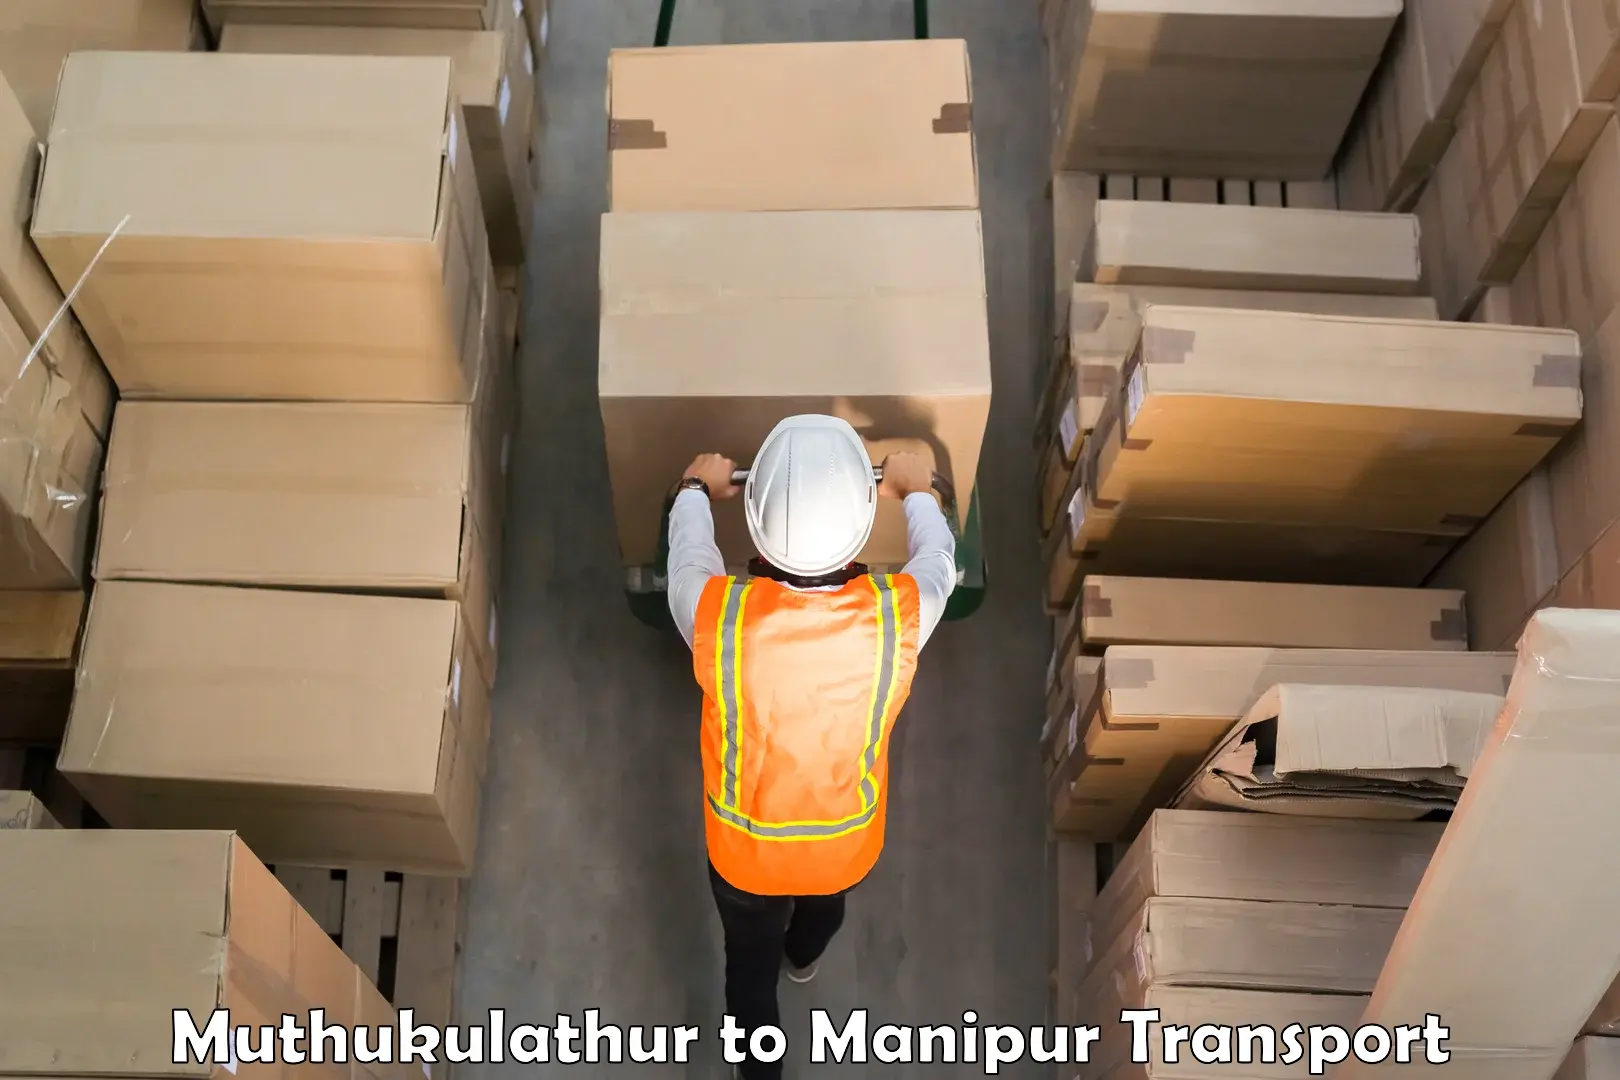 Part load transport service in India Muthukulathur to Manipur